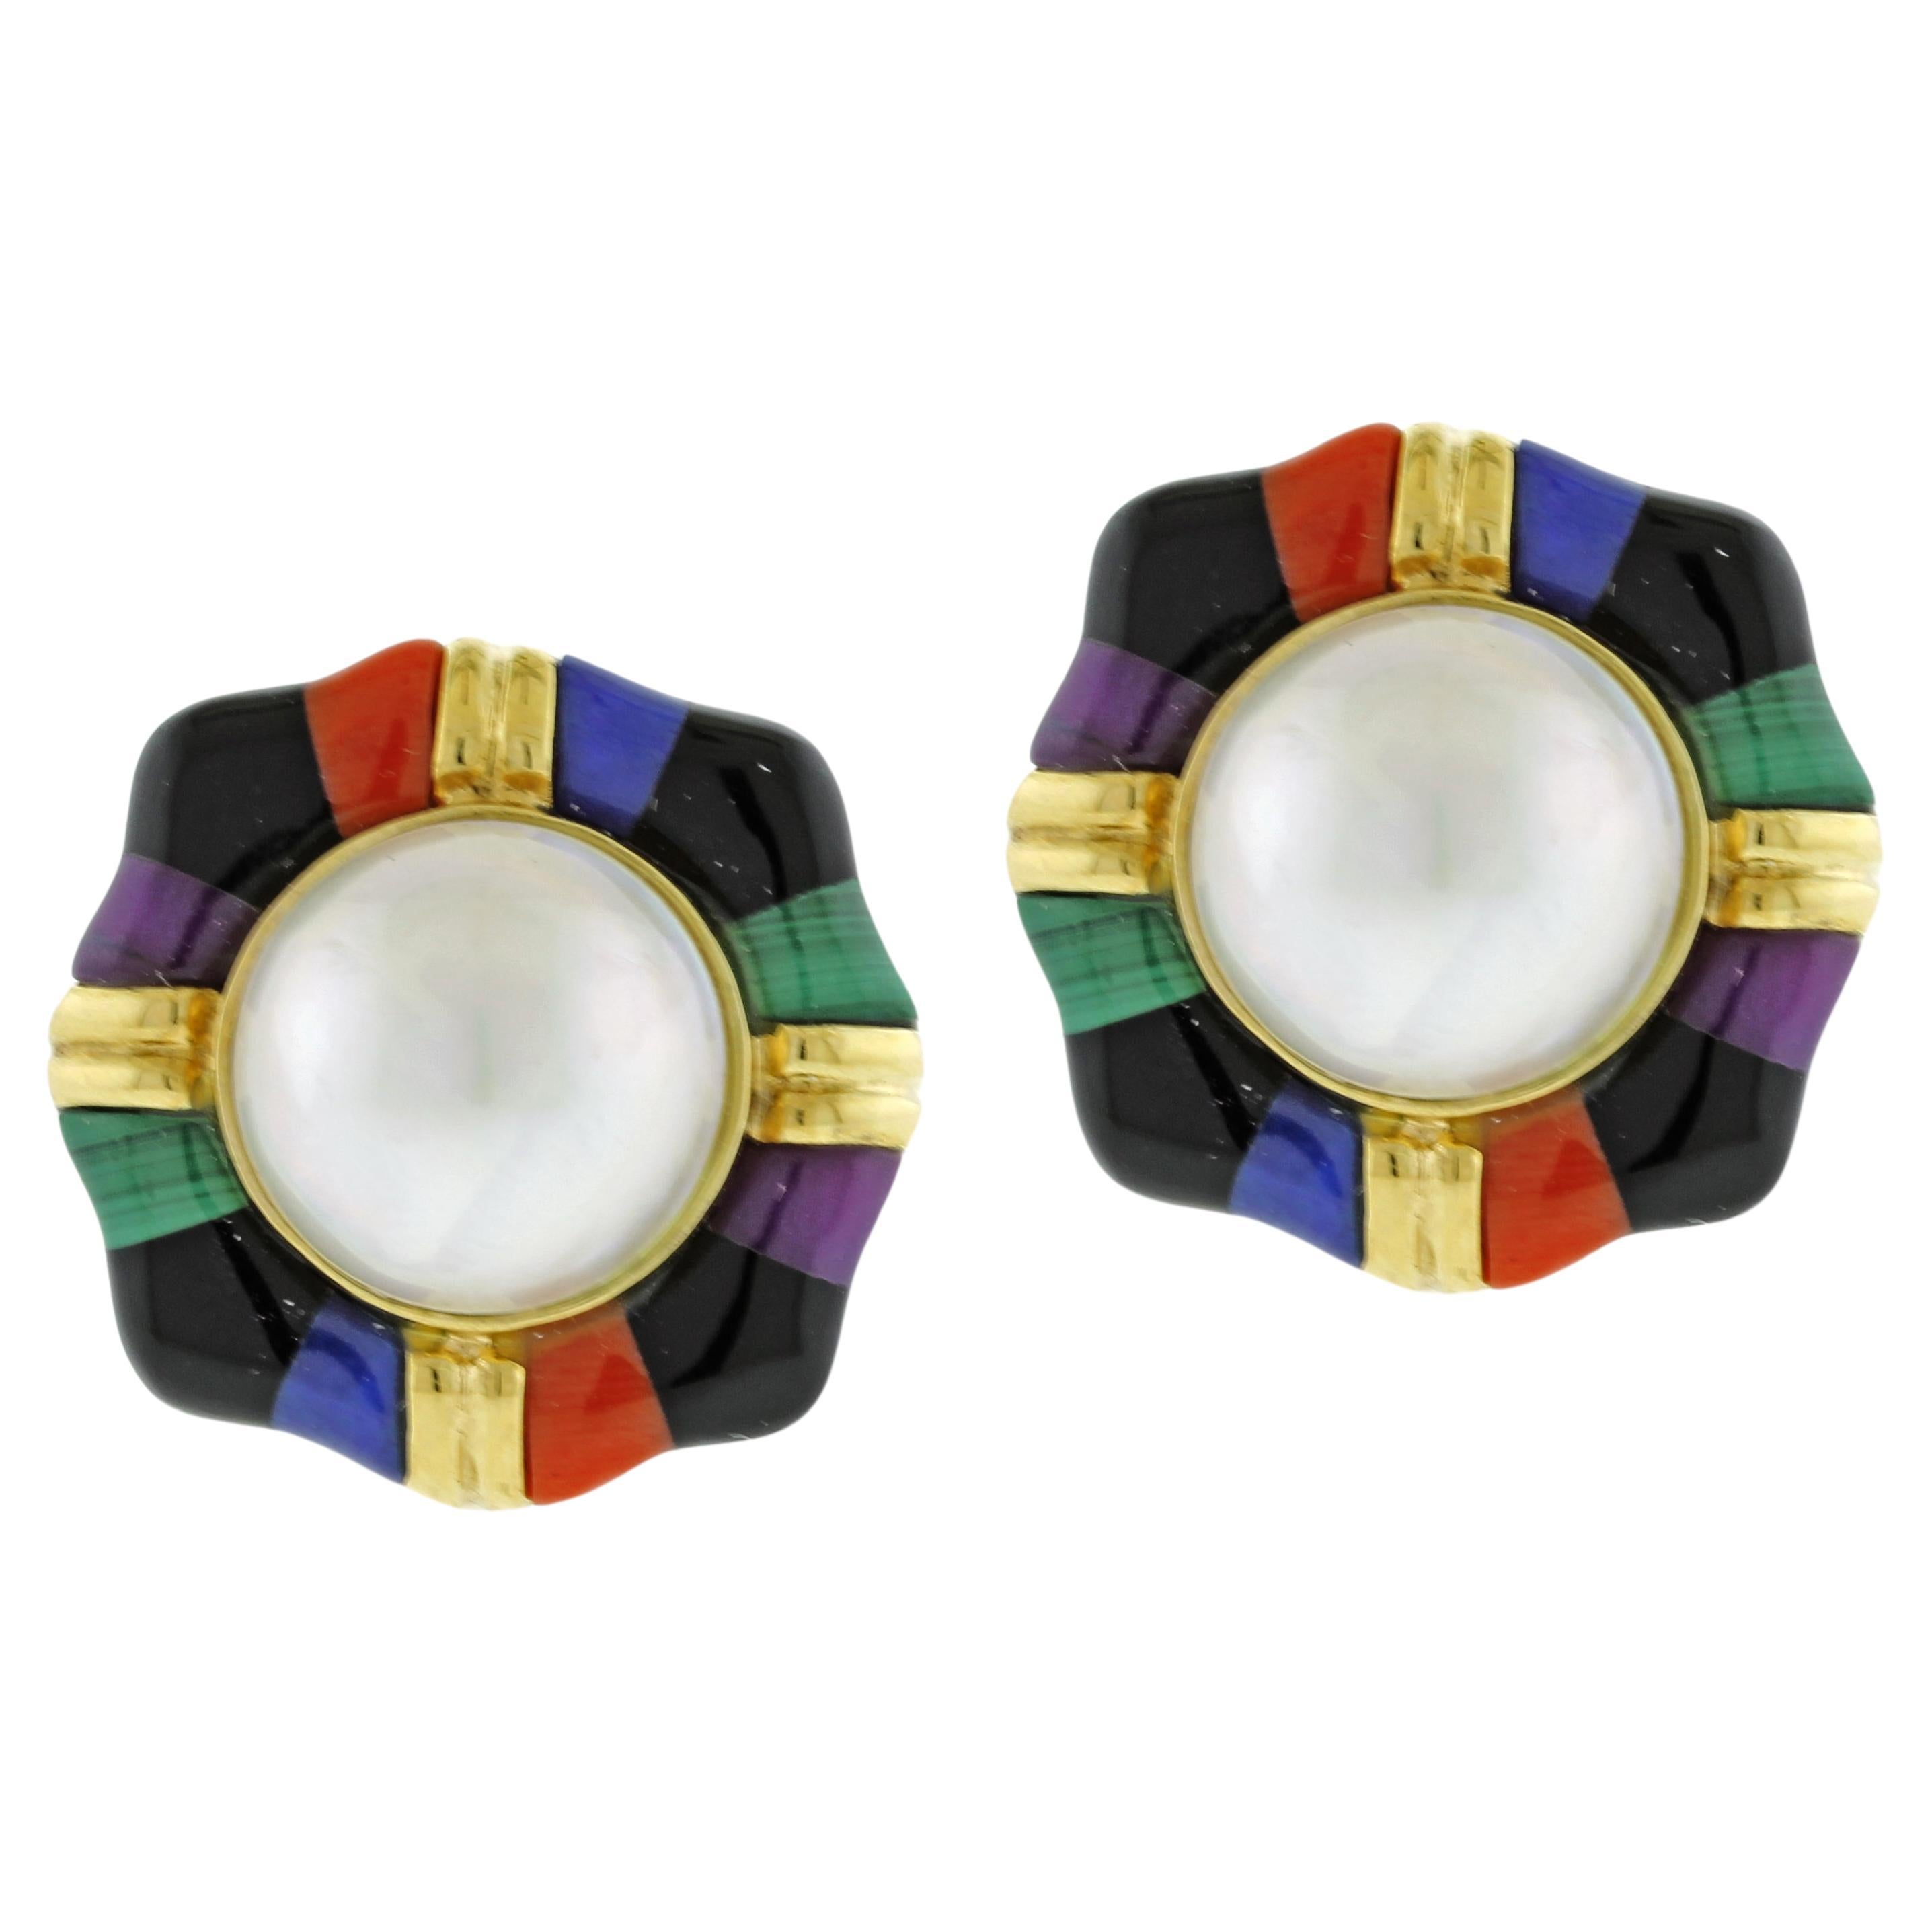 Asch Grossbardt Mabe Pearl and Gemstone Earrings